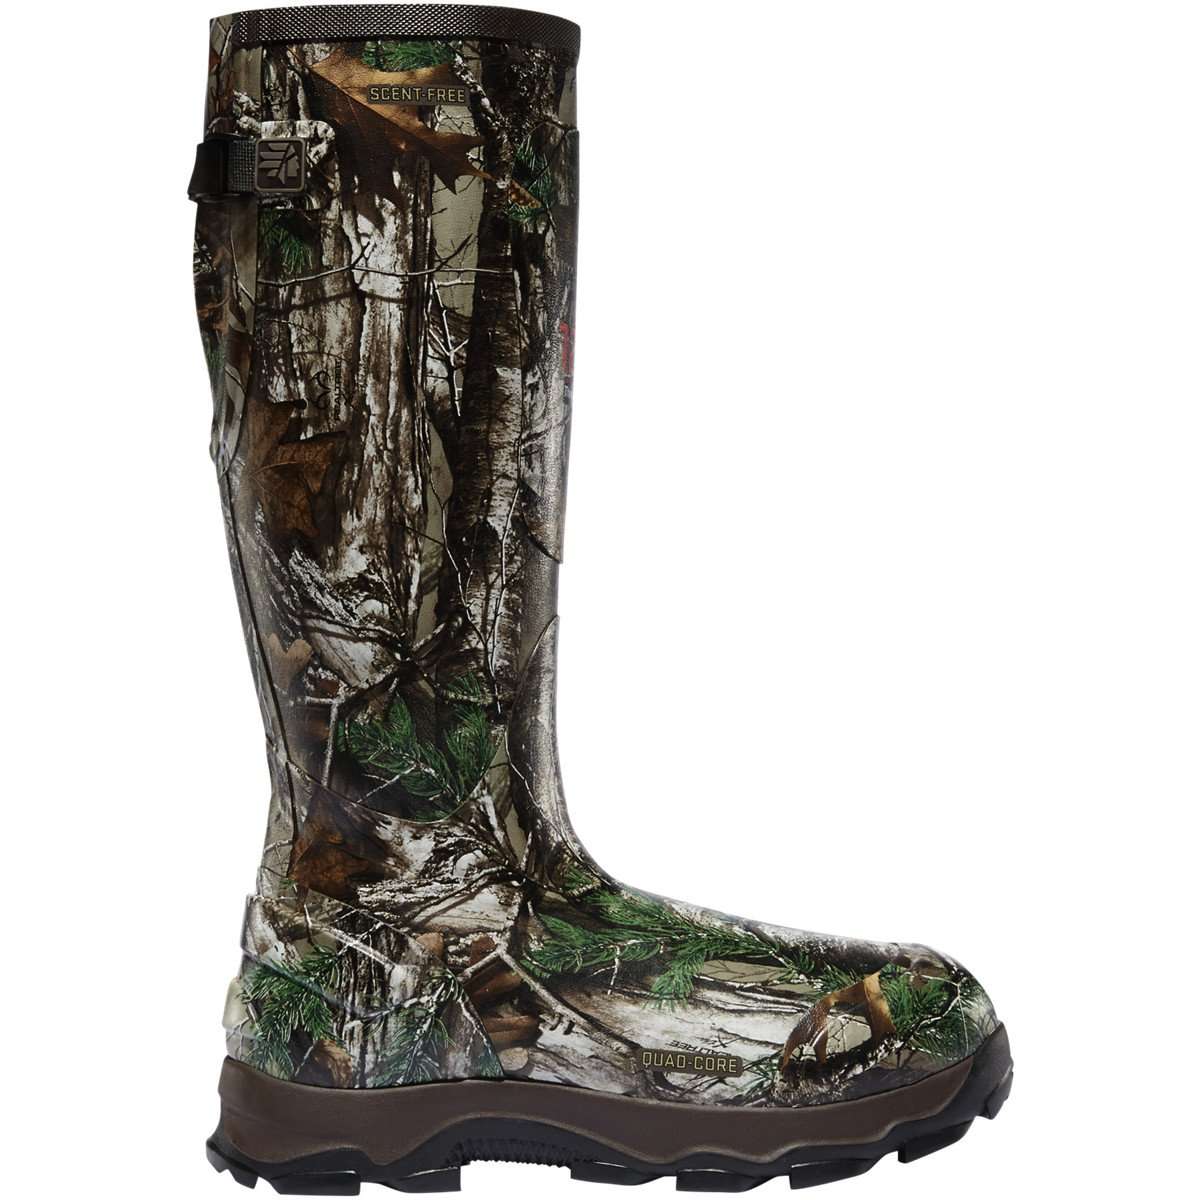 LaCrosse 4XBurly Rubber Boot in Realtree Xtra